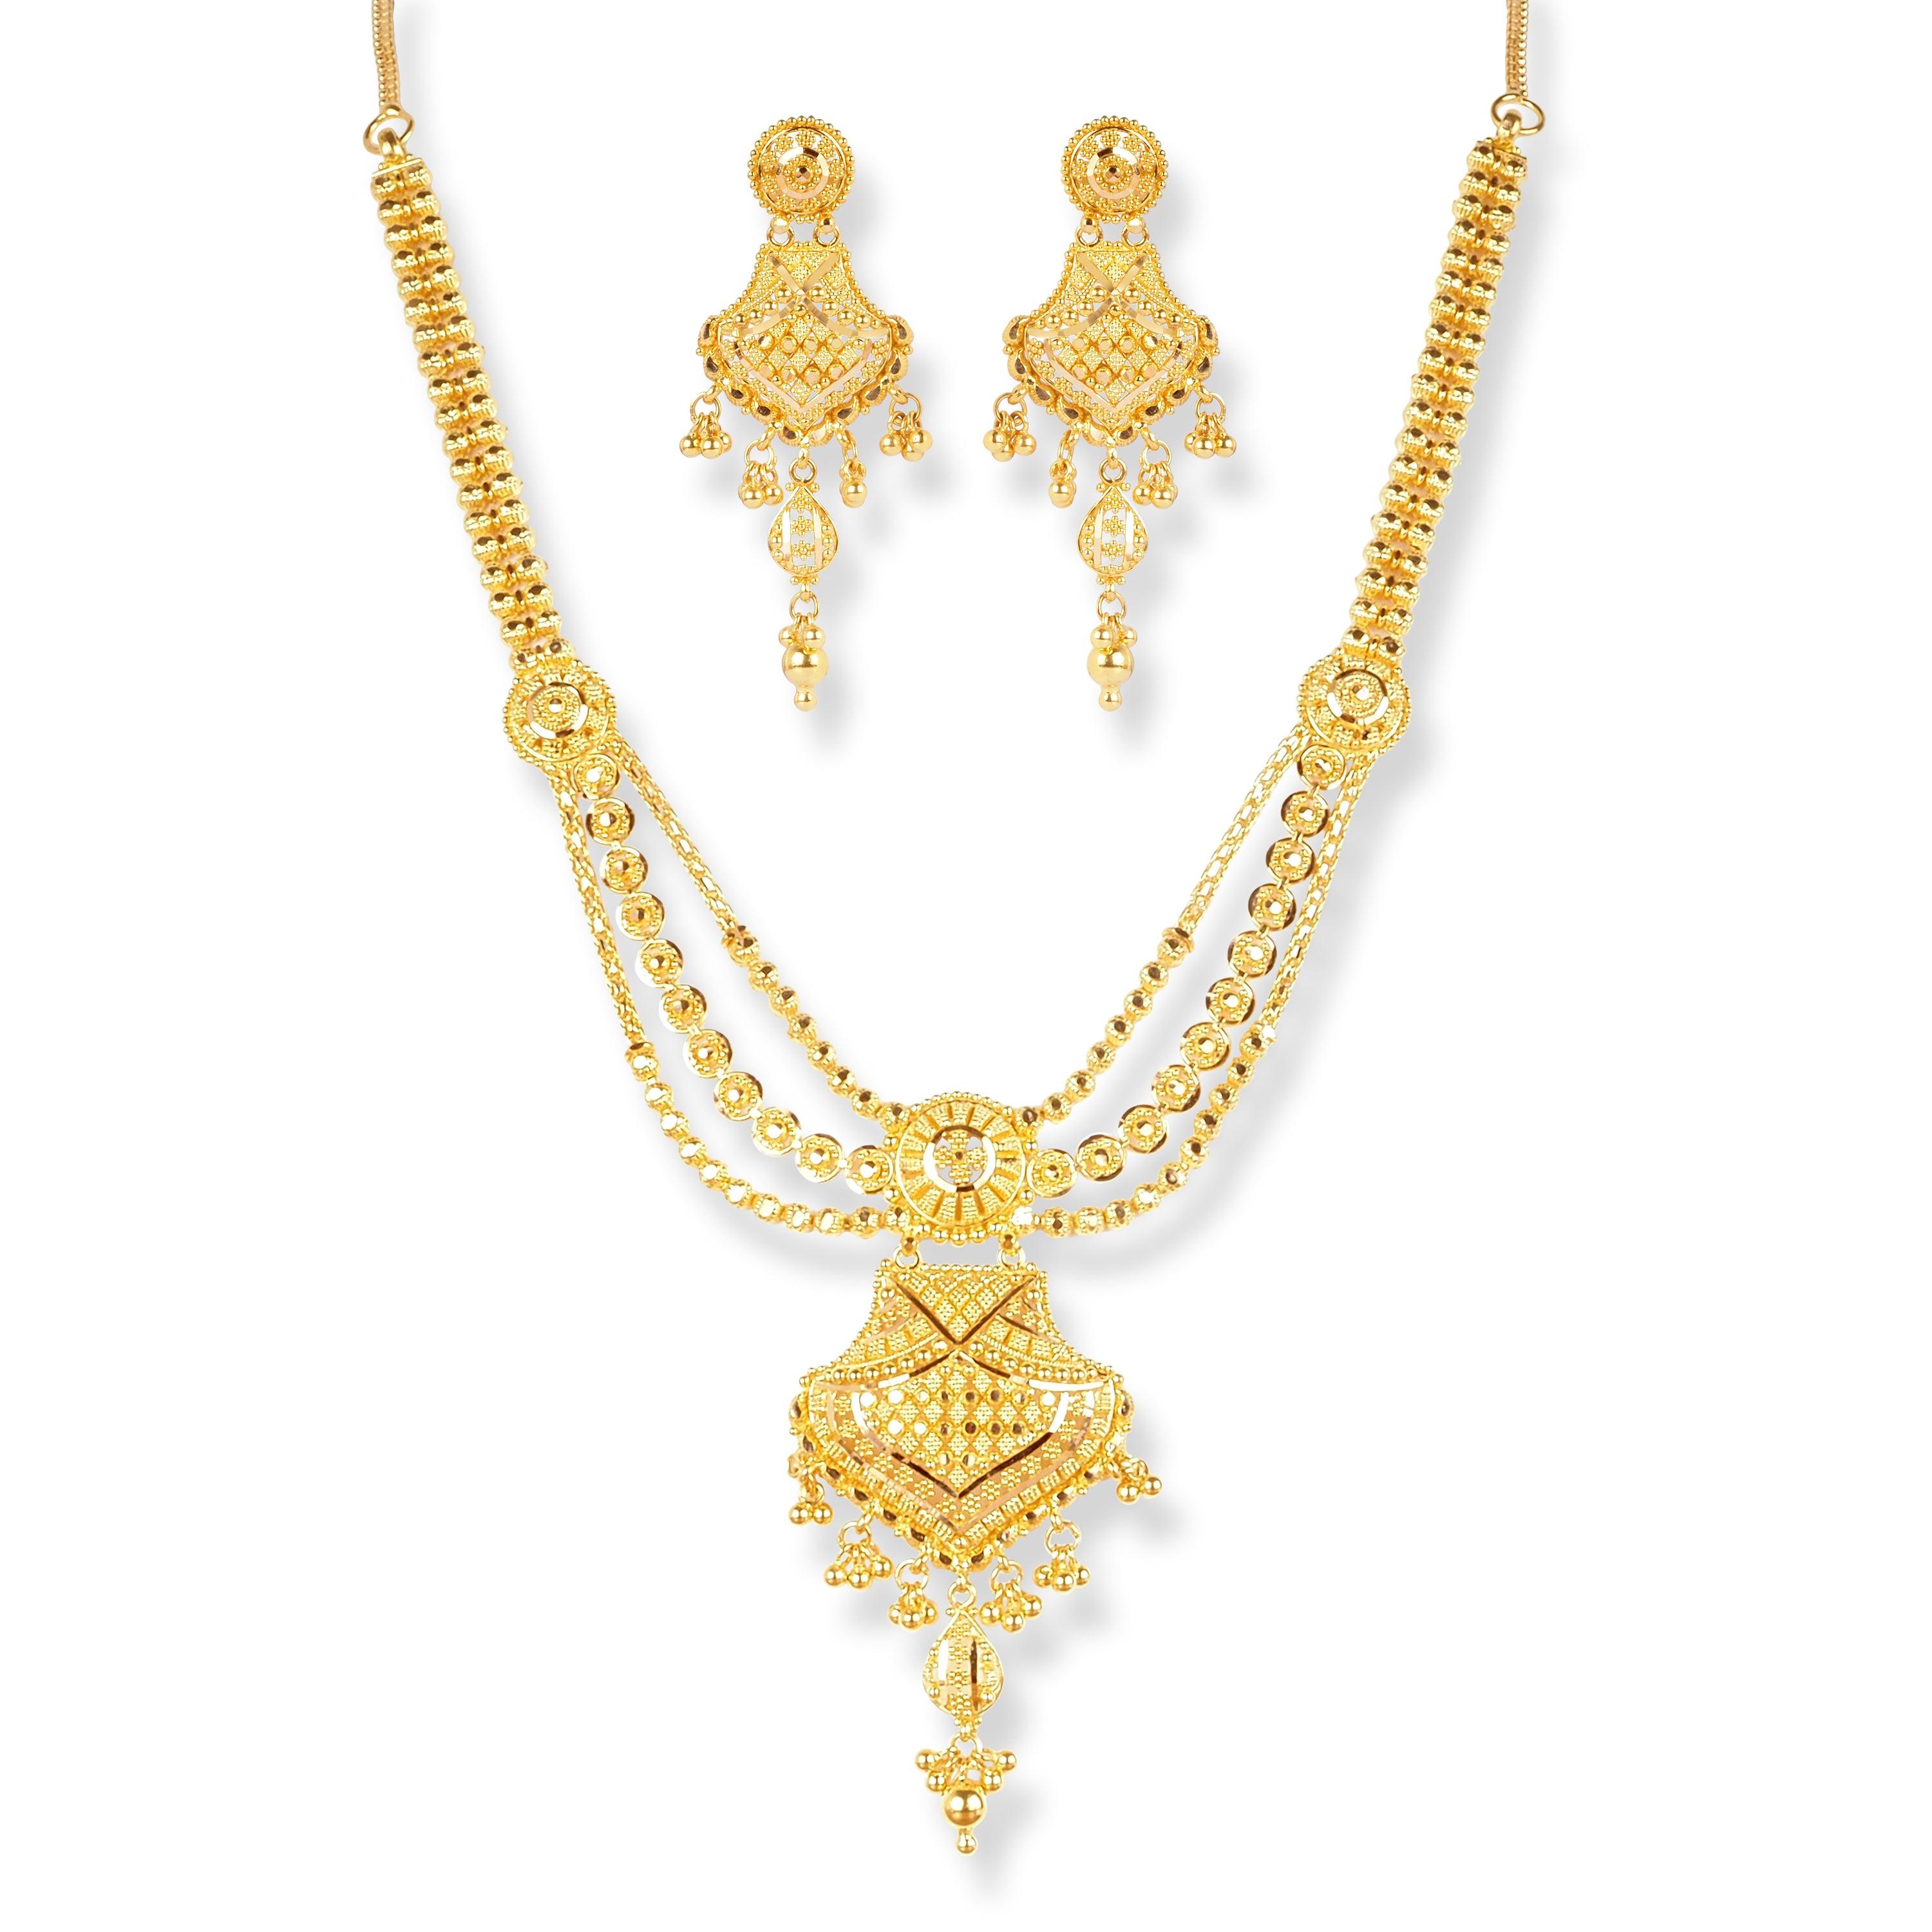 22ct Gold Set with Filigree Work (Necklace + Earrings) N-7876 E-7876 - Minar Jewellers